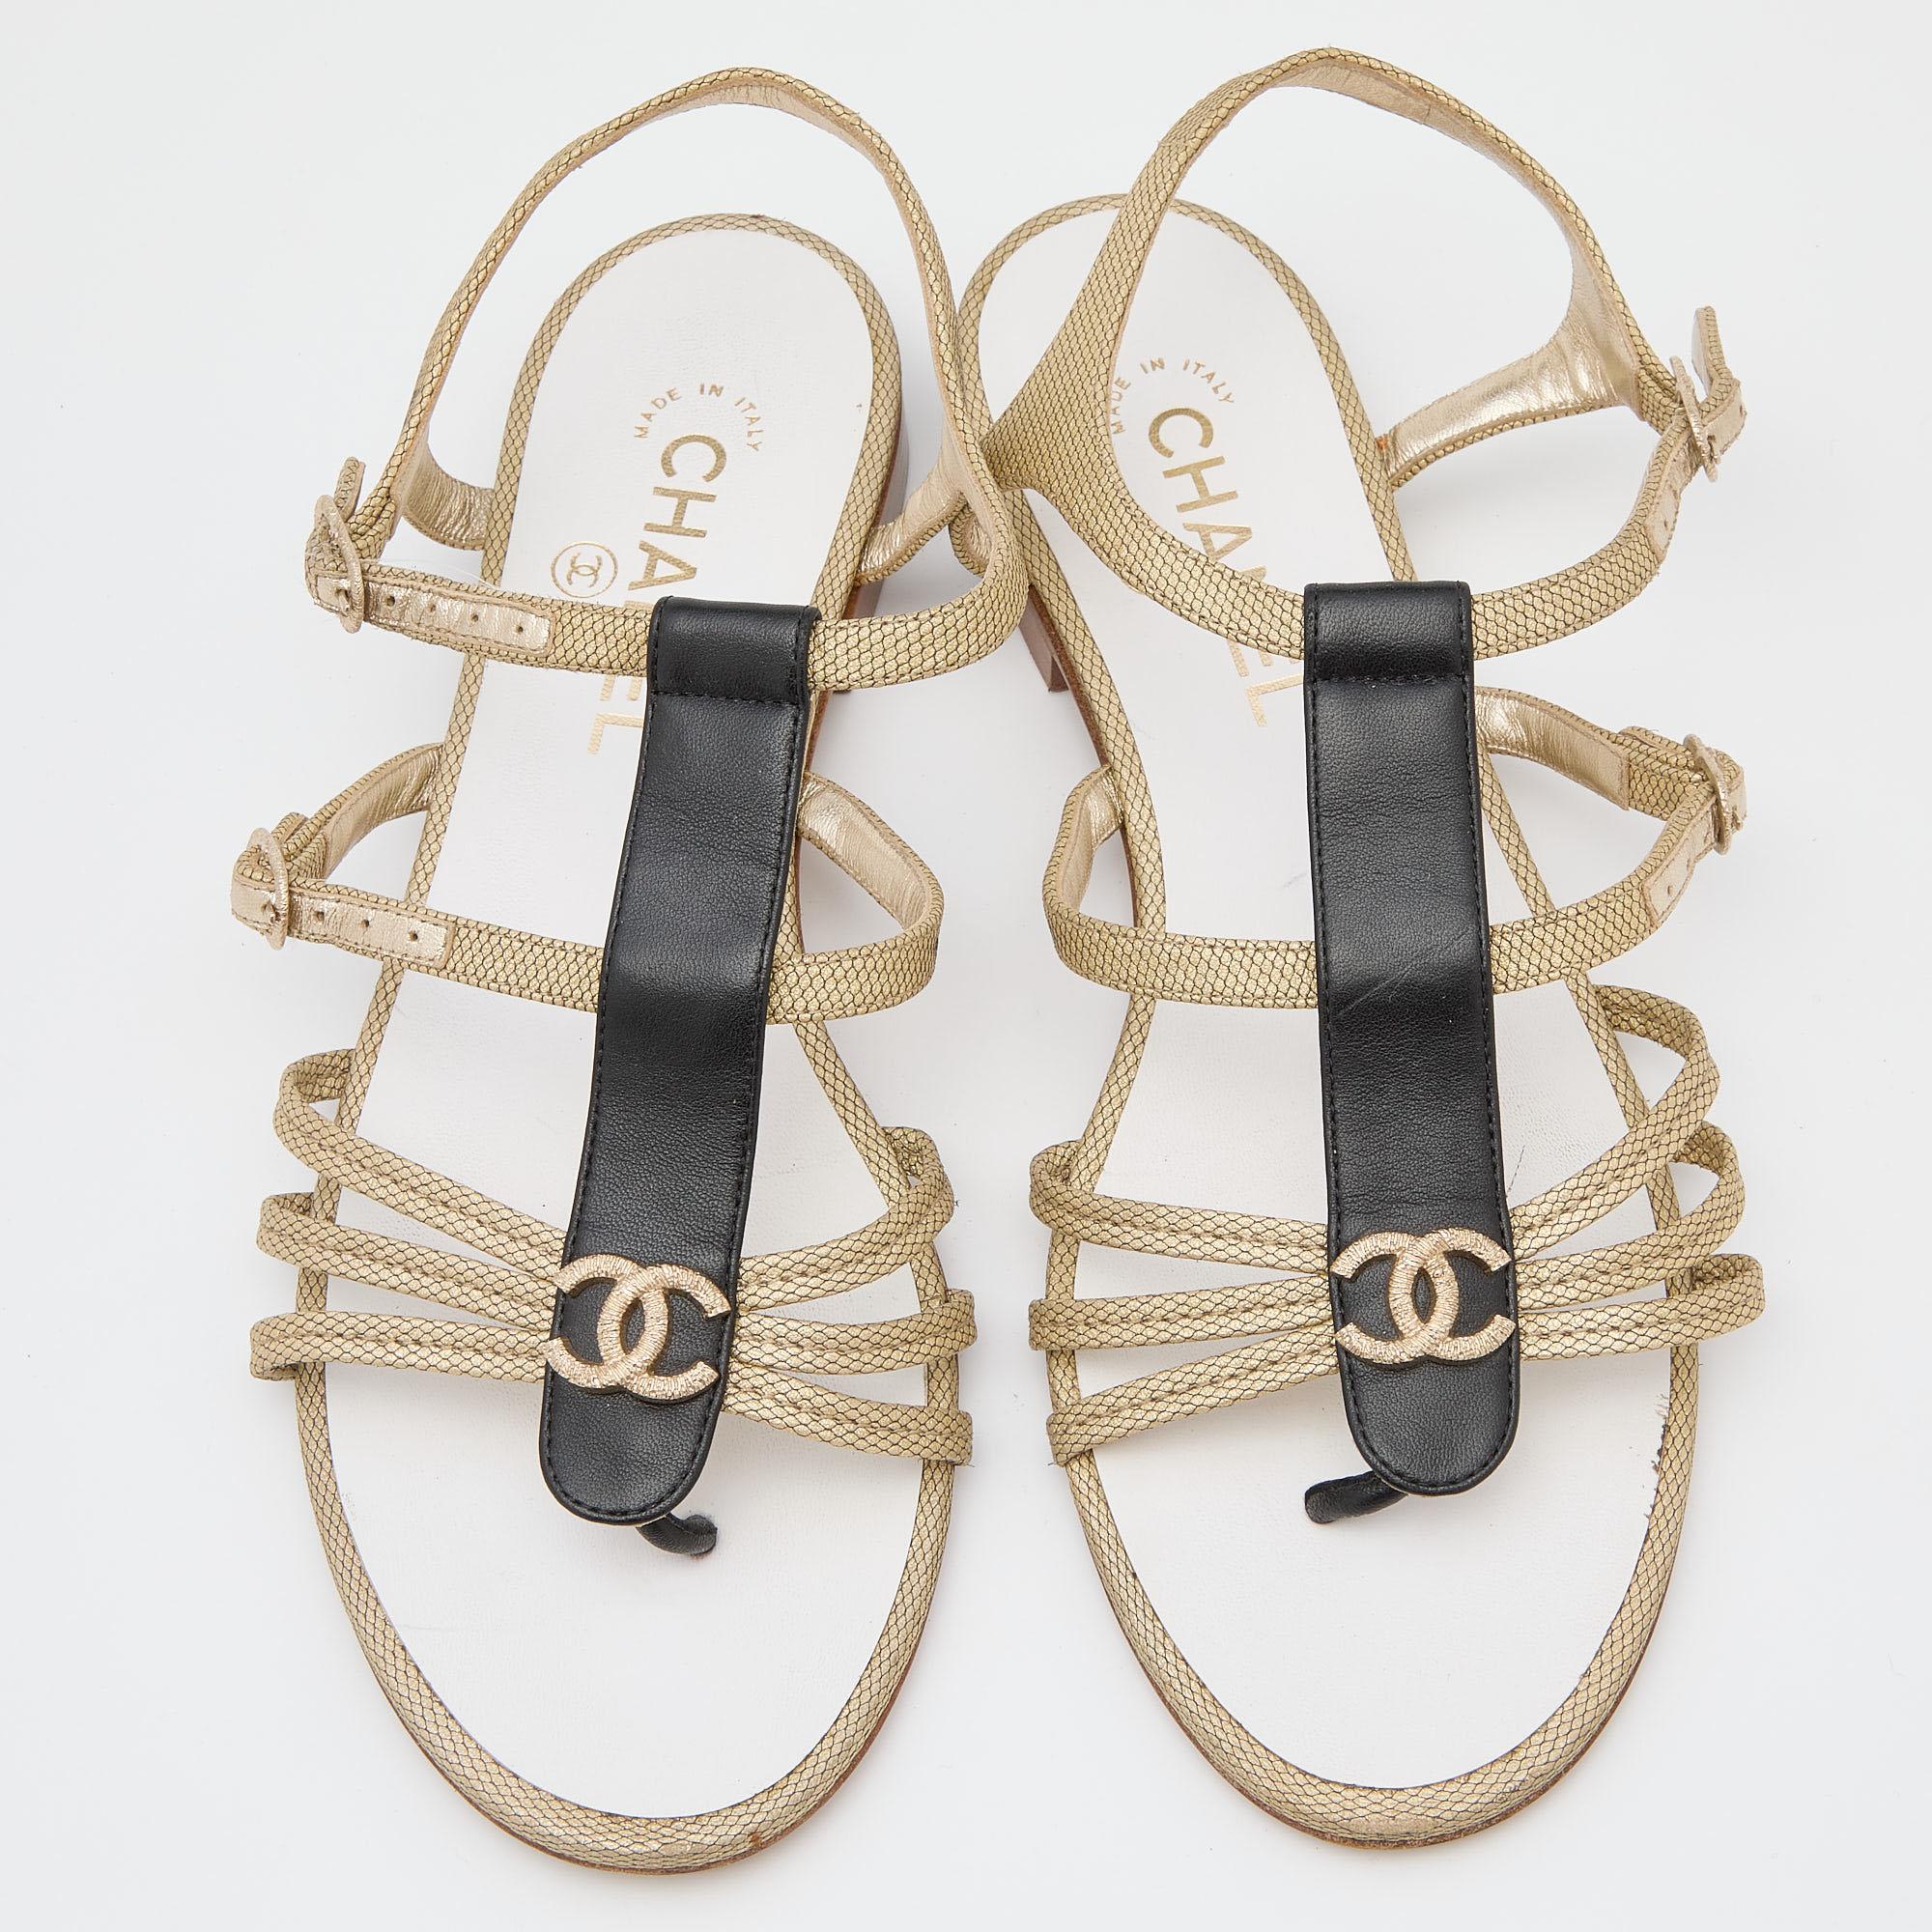 Unique in style and comfortable for daily wear, these Chanel sandals will easily become your favorite go-to shoes! Crafted from textured leather, they feature the CC logo on the front. They come with buckled ankle straps and tough soles.

